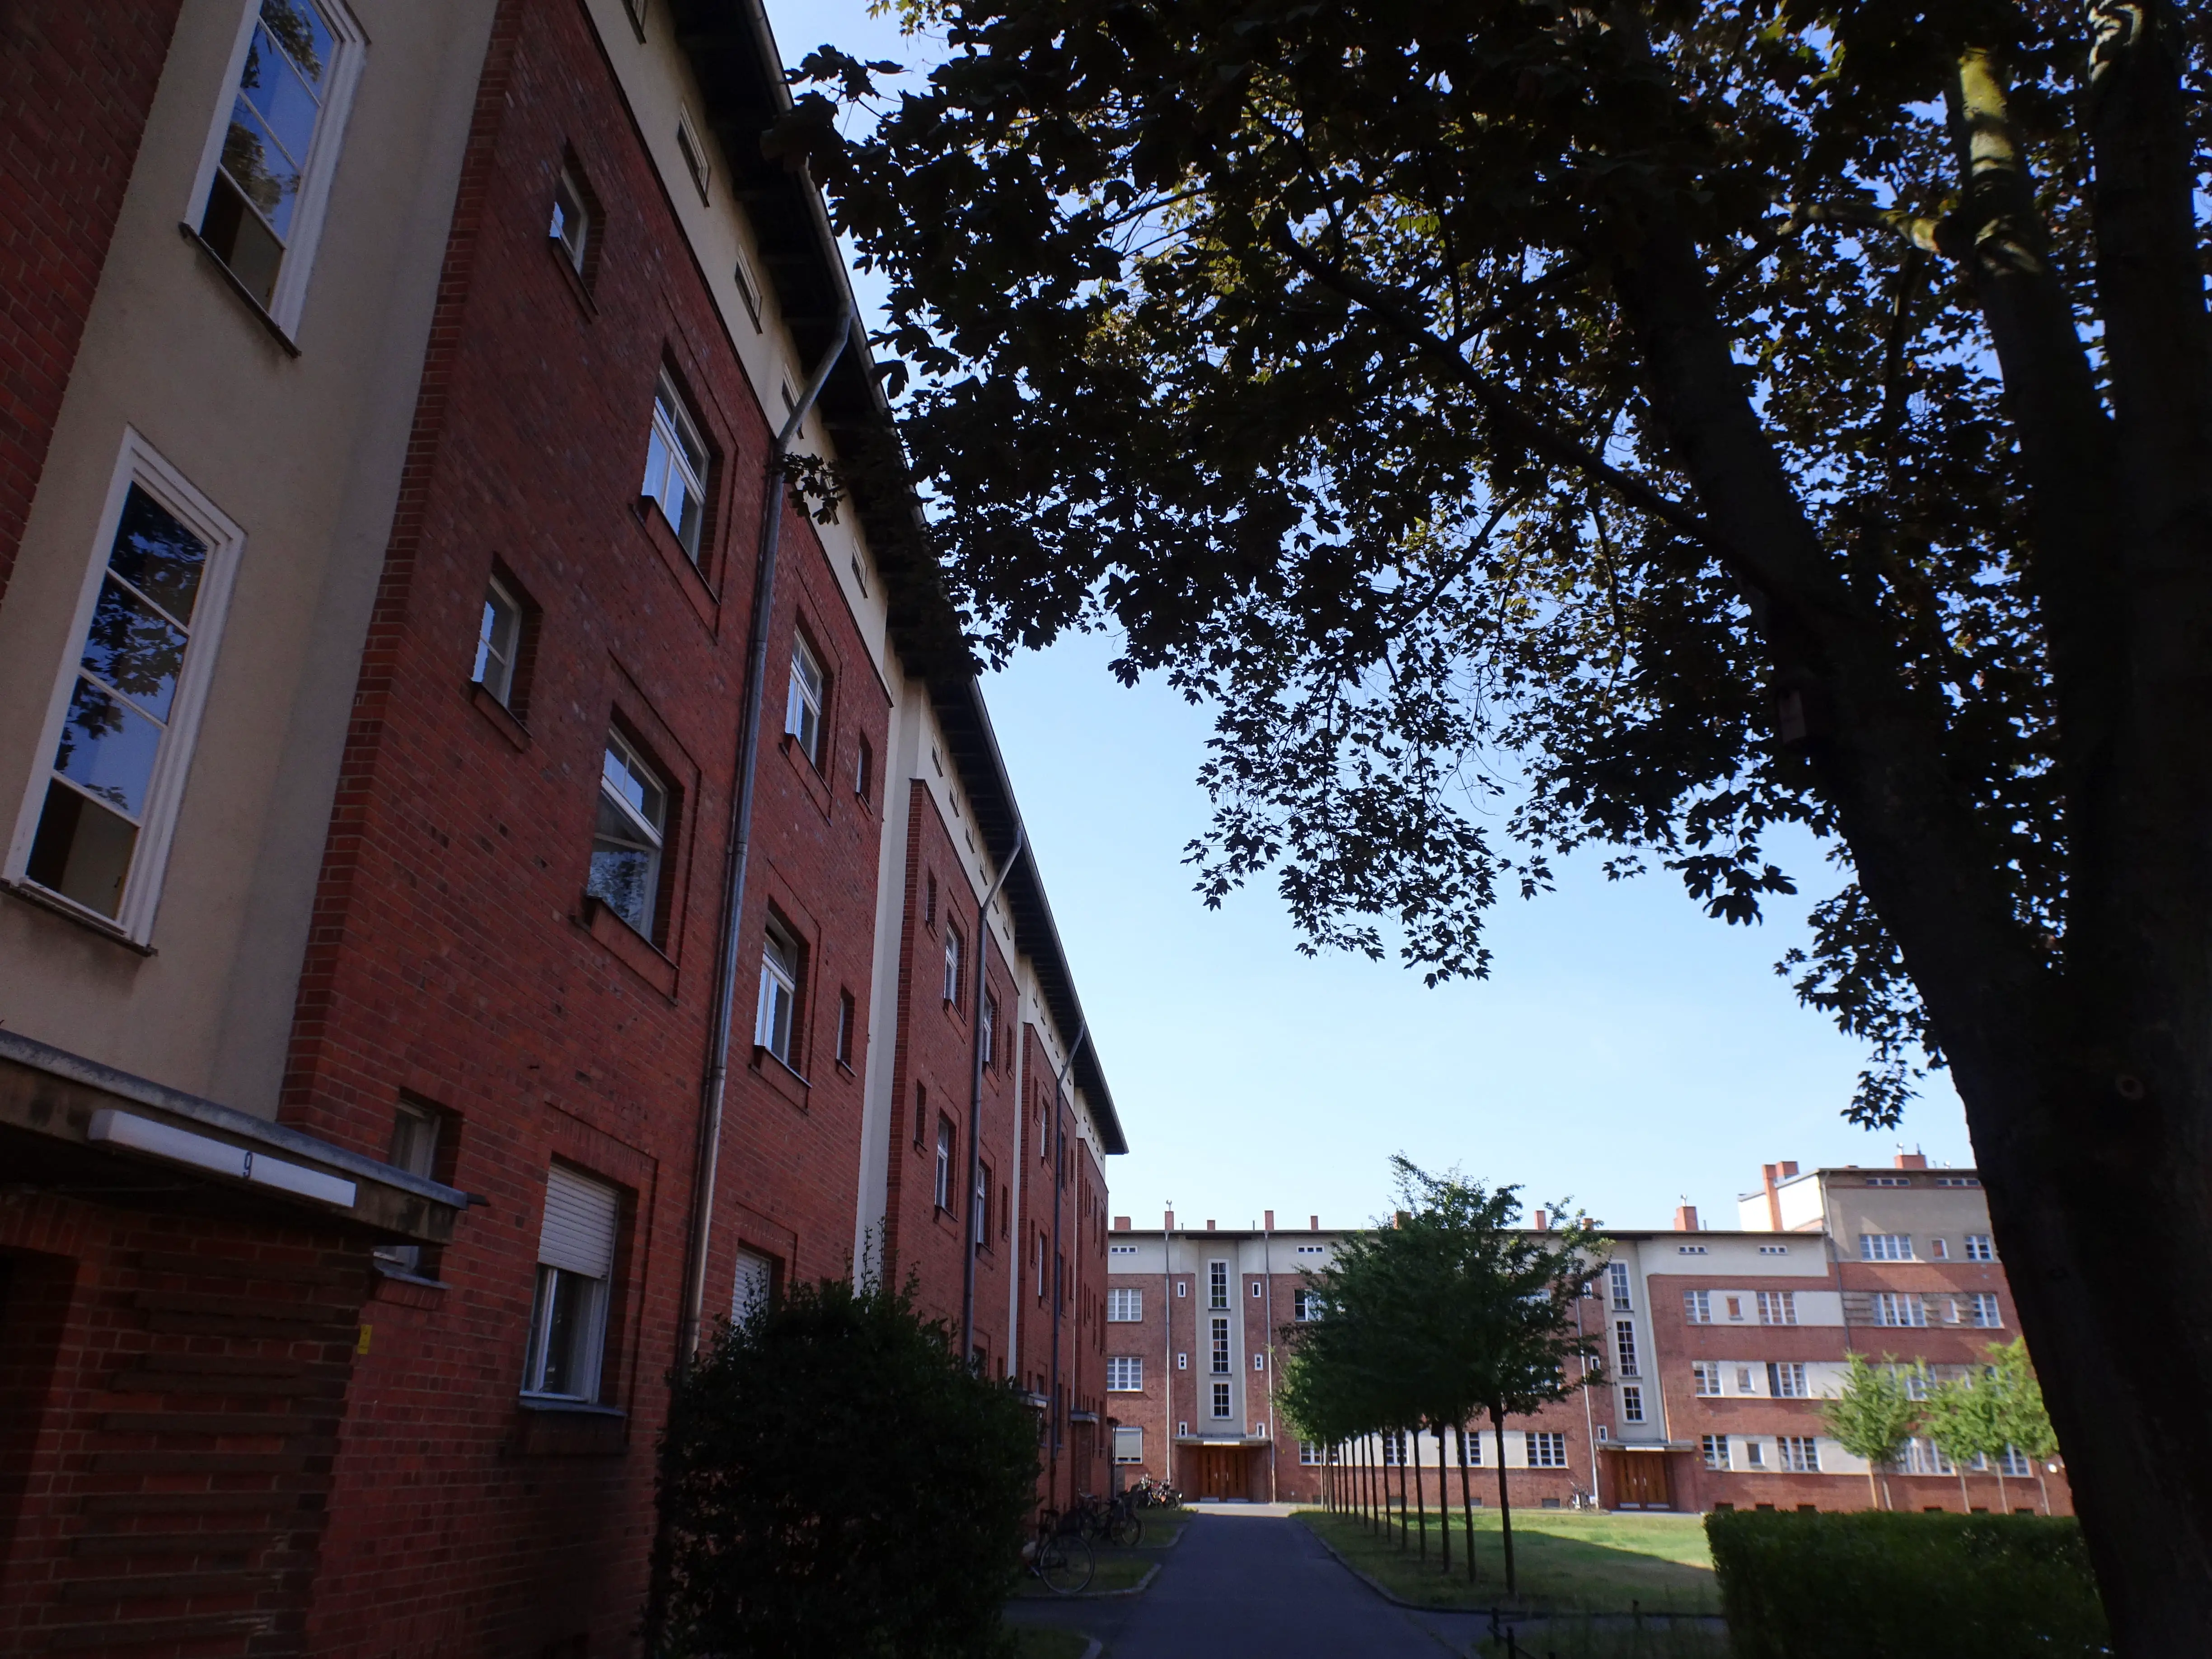 A housing estate surrounding a courtyard with trees